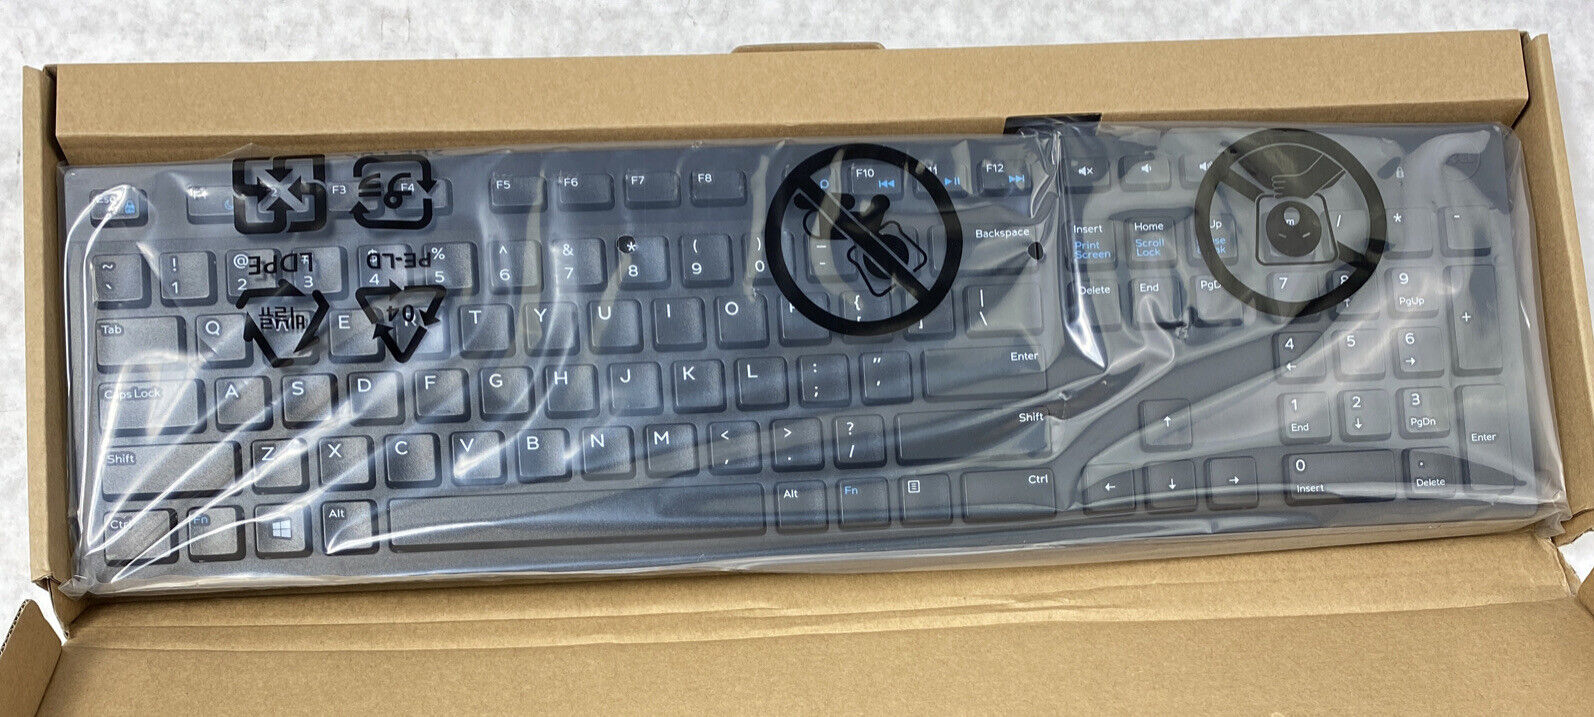 Dell 0G4D2W Wired USB KB216-BK-US Keyboard with Multimedia Controls Black